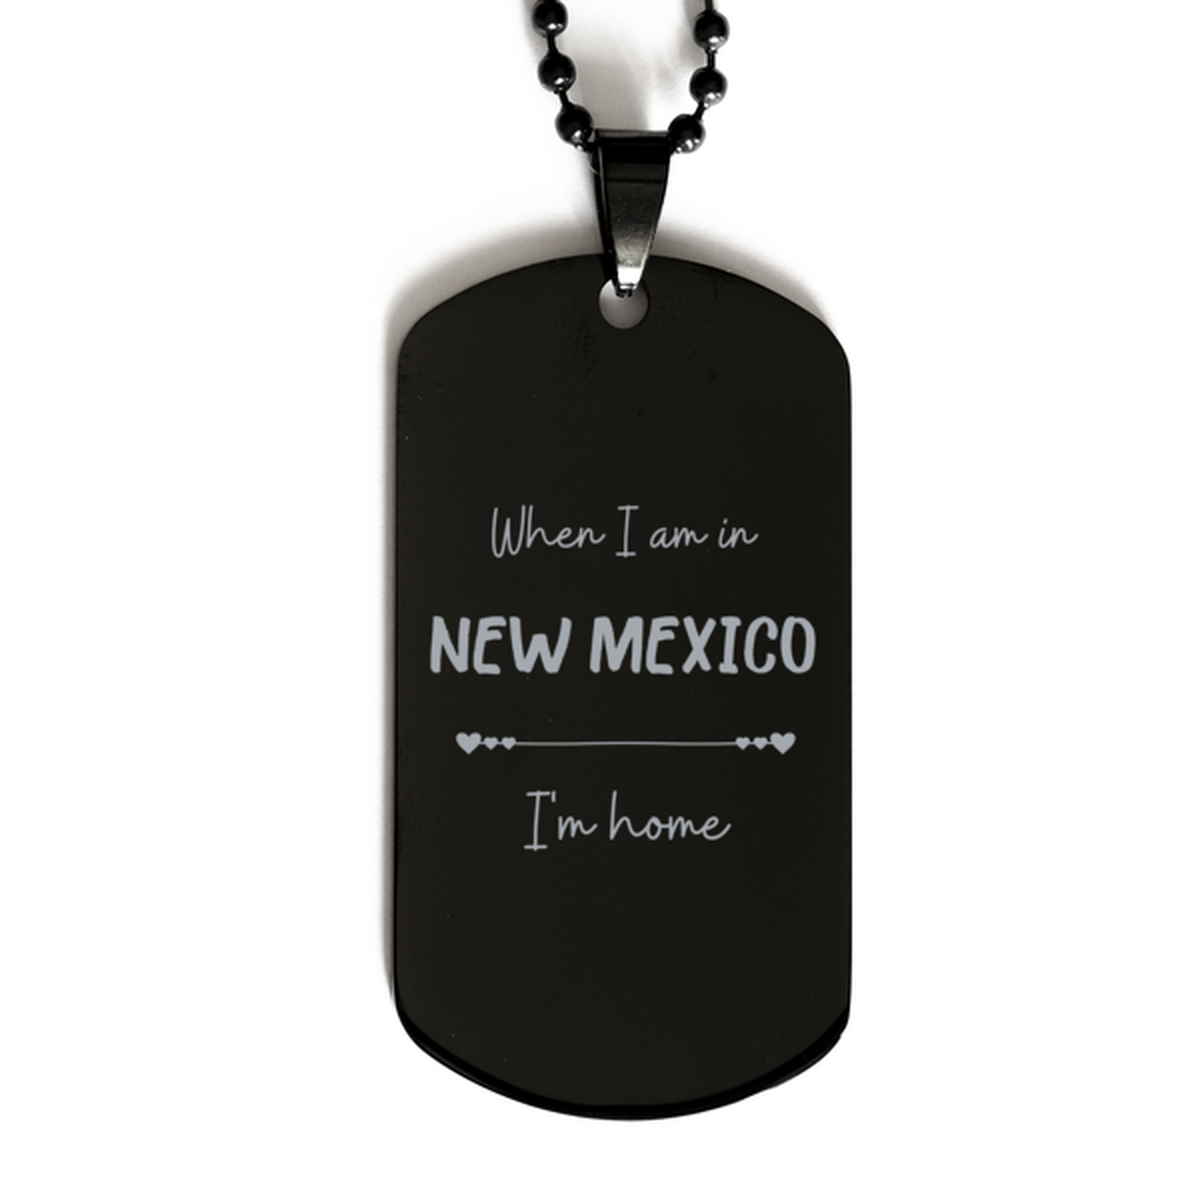 When I am in New Mexico I'm home Black Dog Tag, Cheap Gifts For New Mexico, State New Mexico Birthday Gifts for Friends Coworker